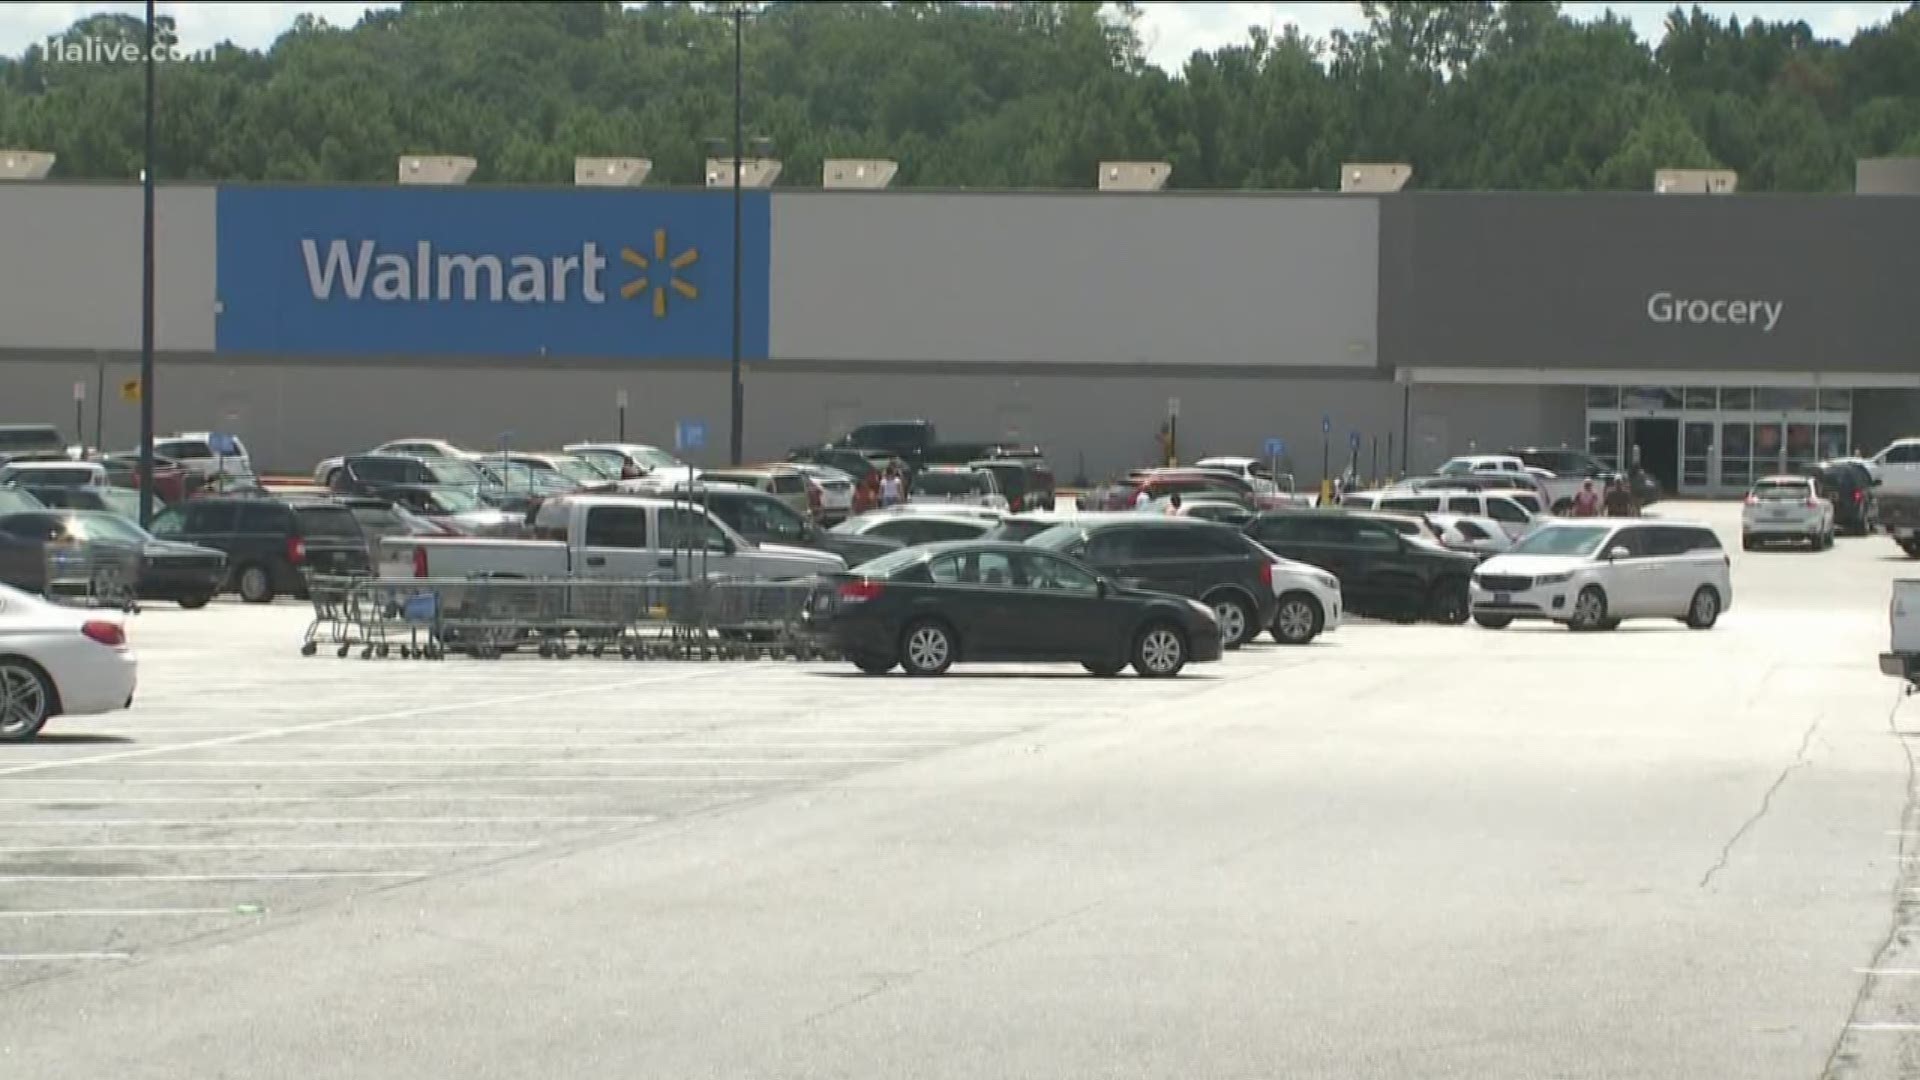 Around the country and in metro Atlanta, recent mass shootings have led to false alarms and heightened security at stores. One fake warning recently cautioned customers at a Coweta County Walmart.